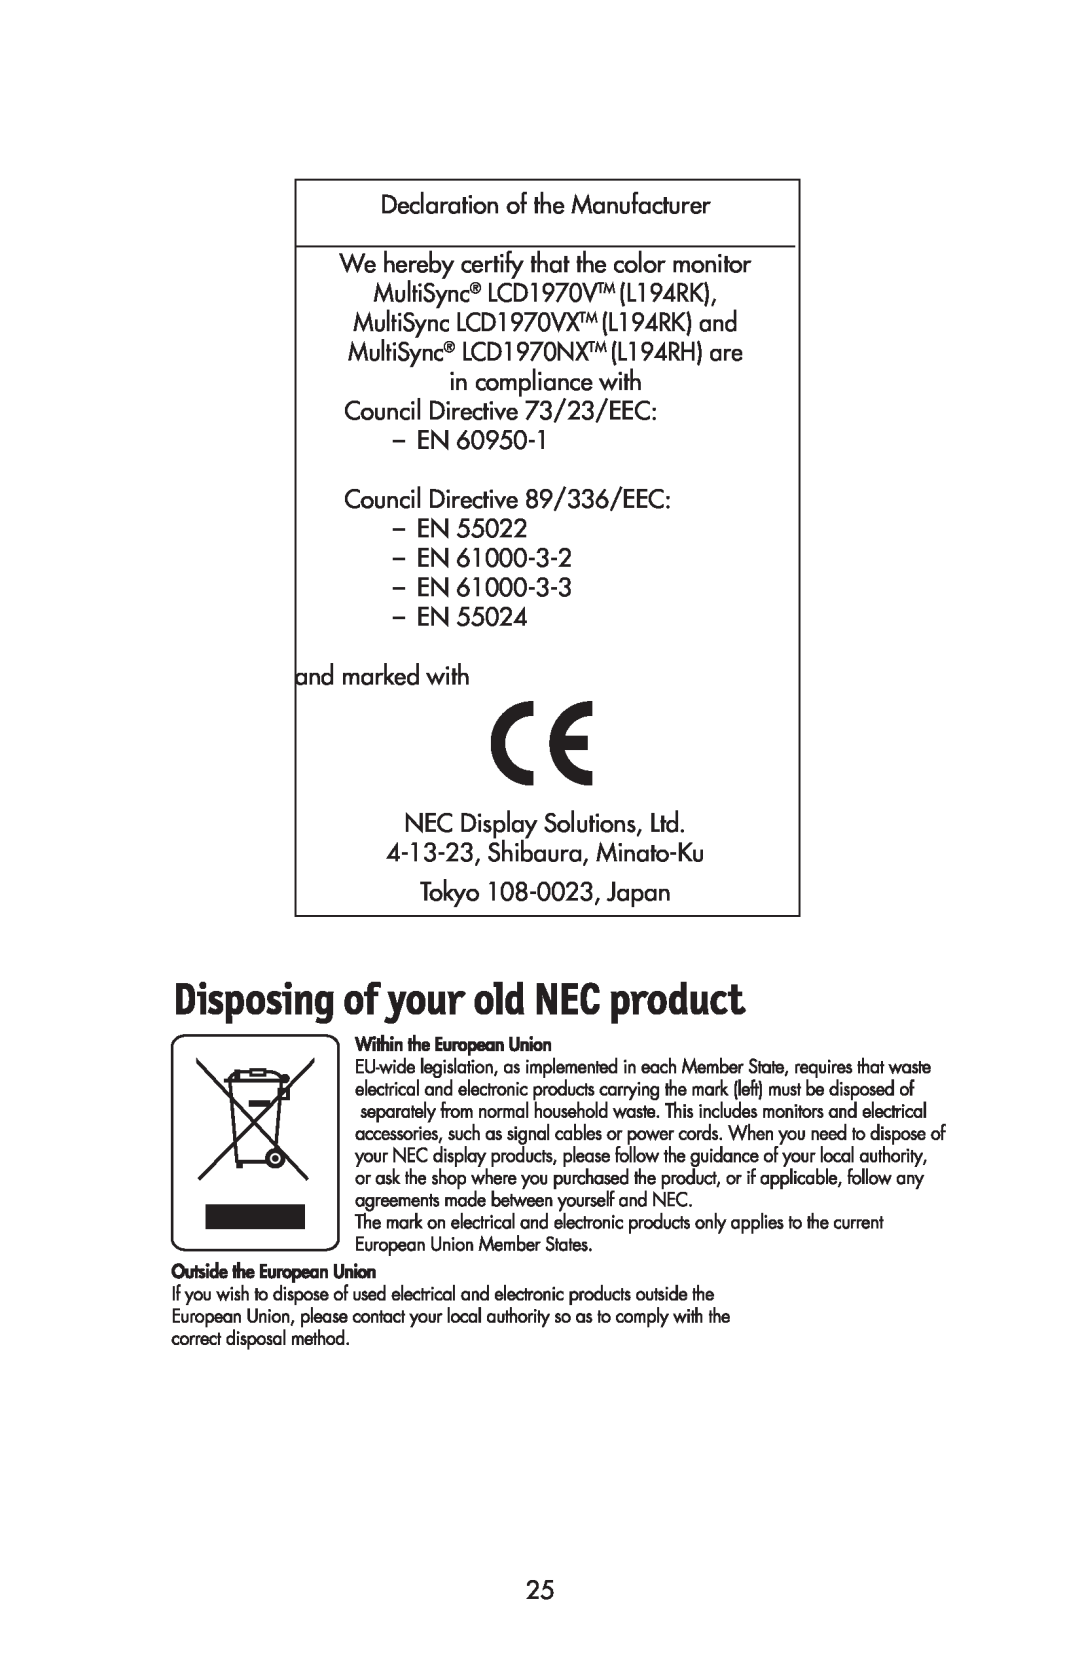 NEC user manual Declaration of the Manufacturer, We hereby certify that the color monitor, MultiSync LCD1970VTM L194RK 